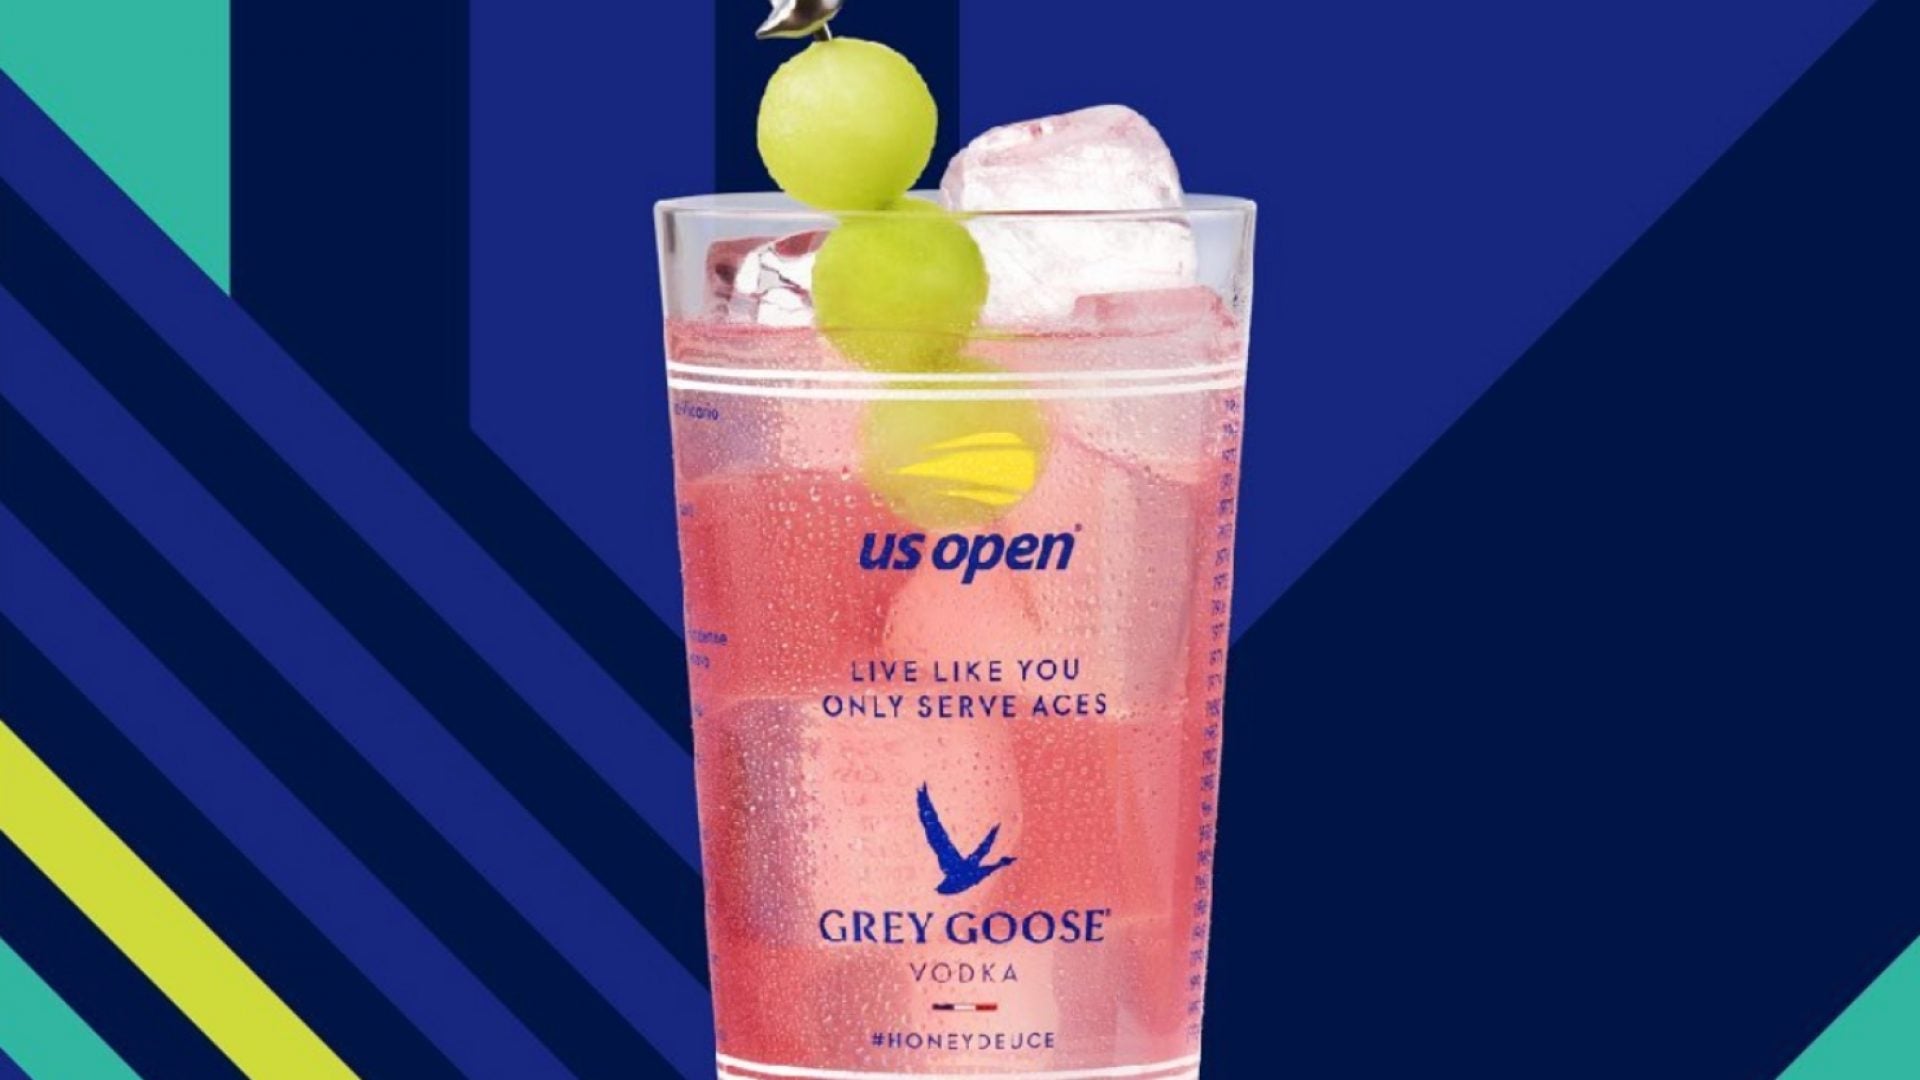 Let's Toast: Here's How To Make The Official U.S. Open Cocktail At Home